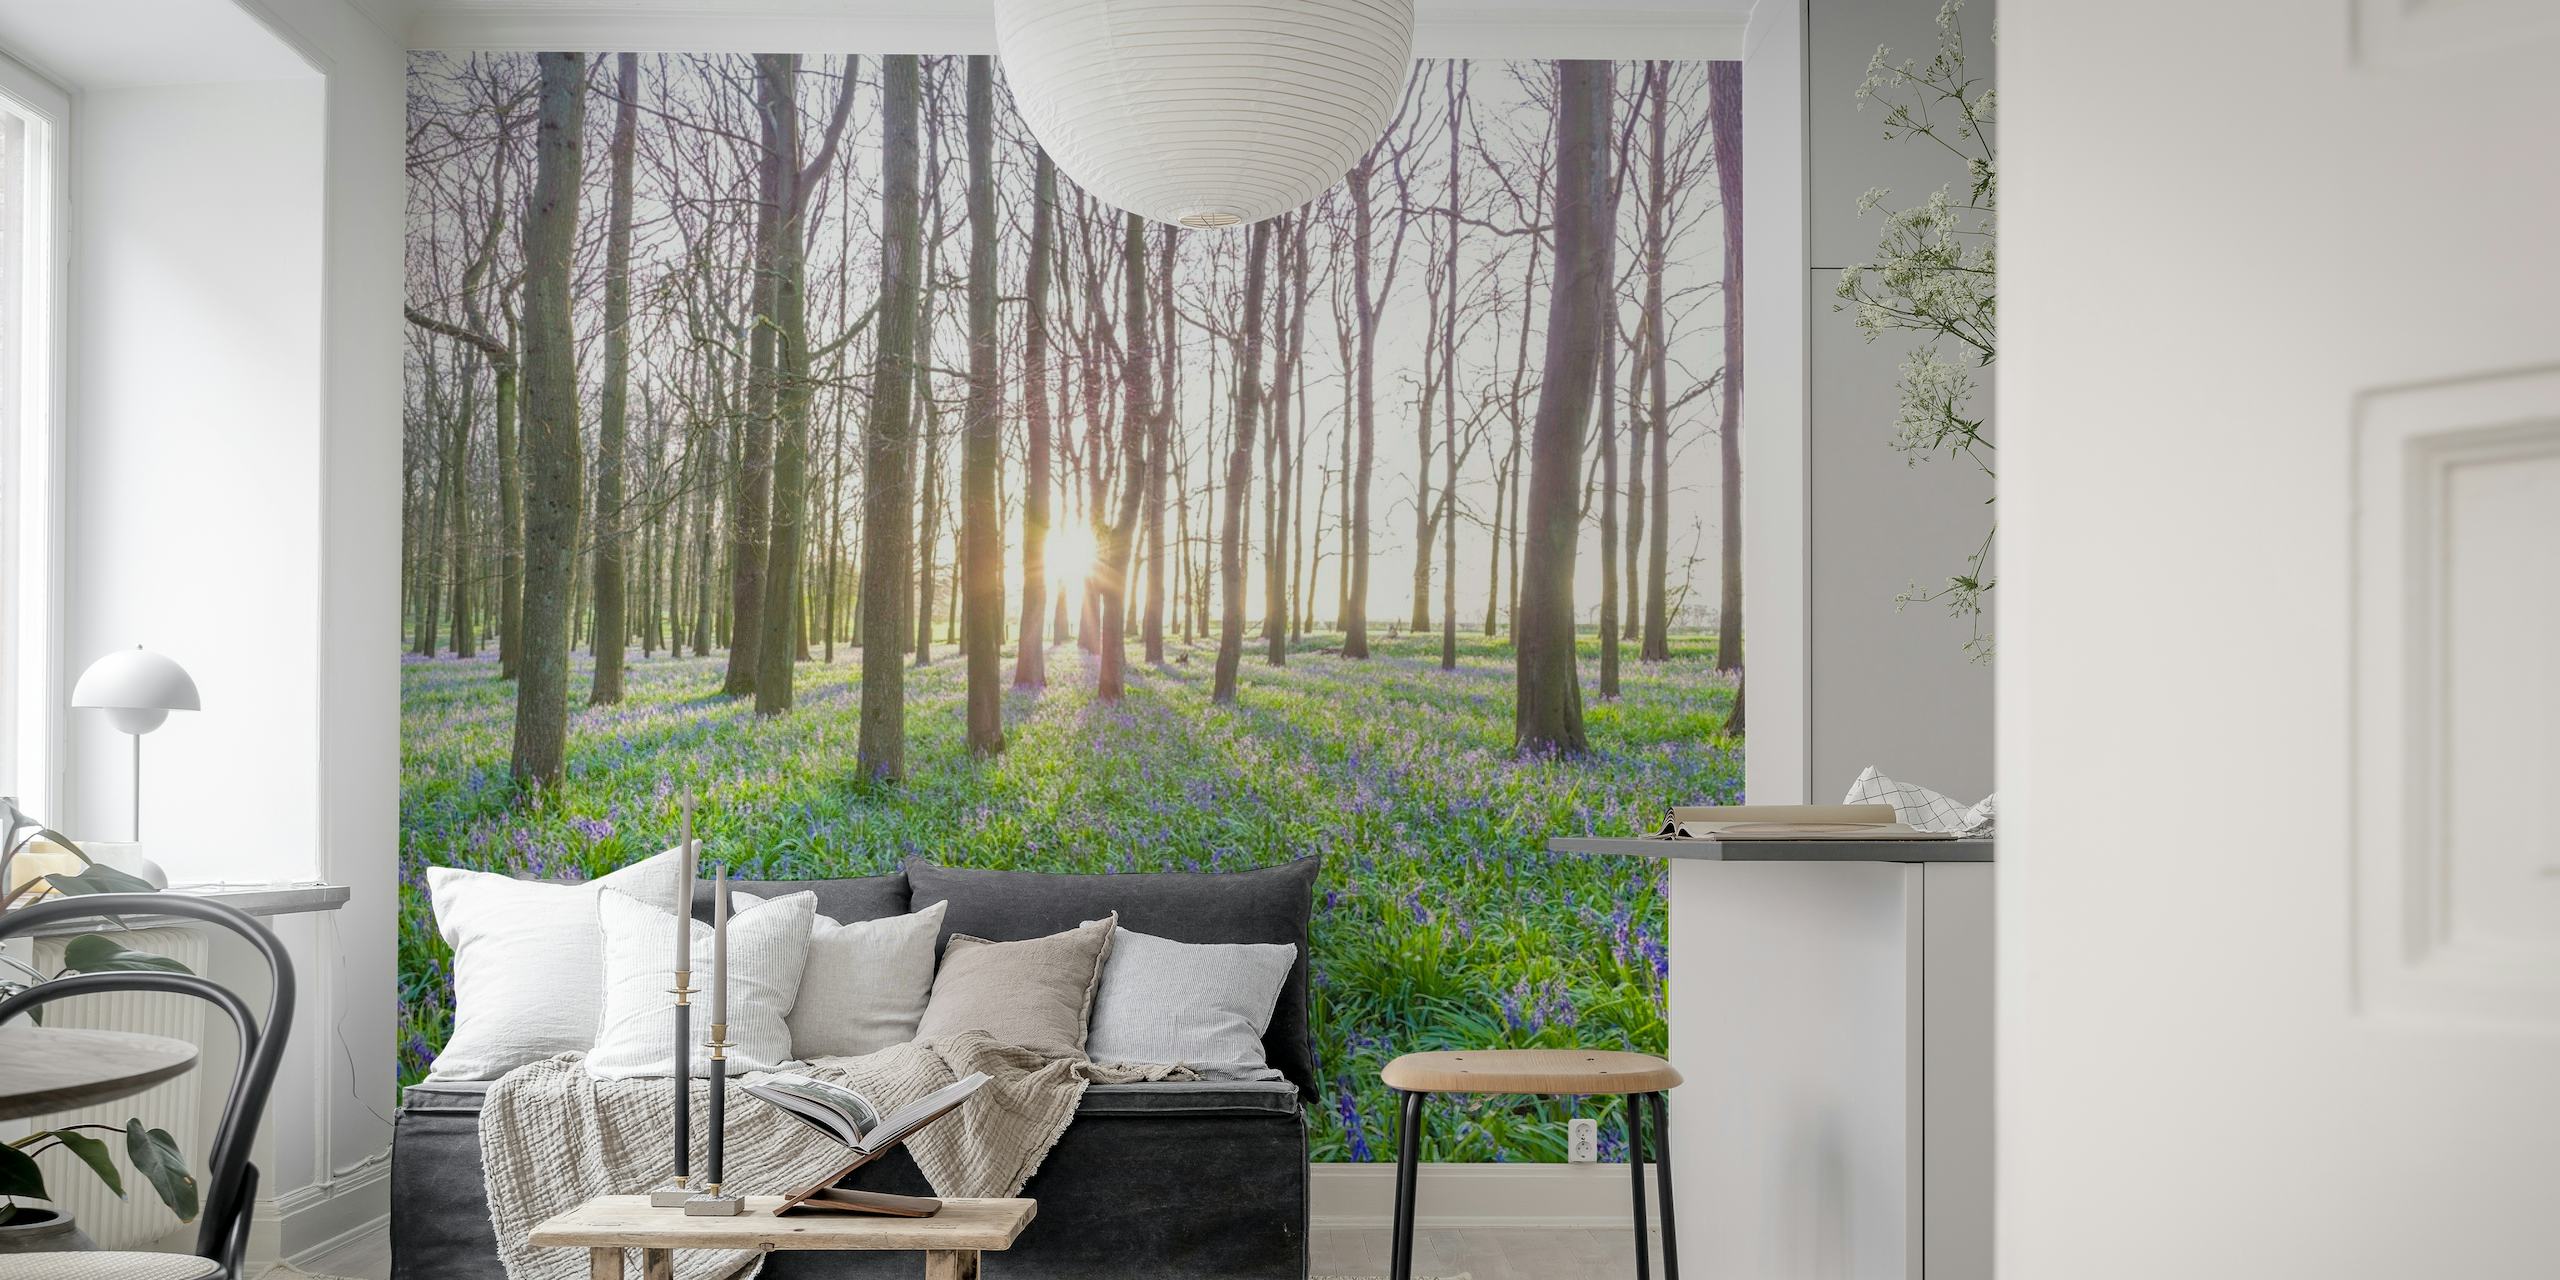 A serene forest with sunlight streaming through trees and bluebells on the ground, wall mural.